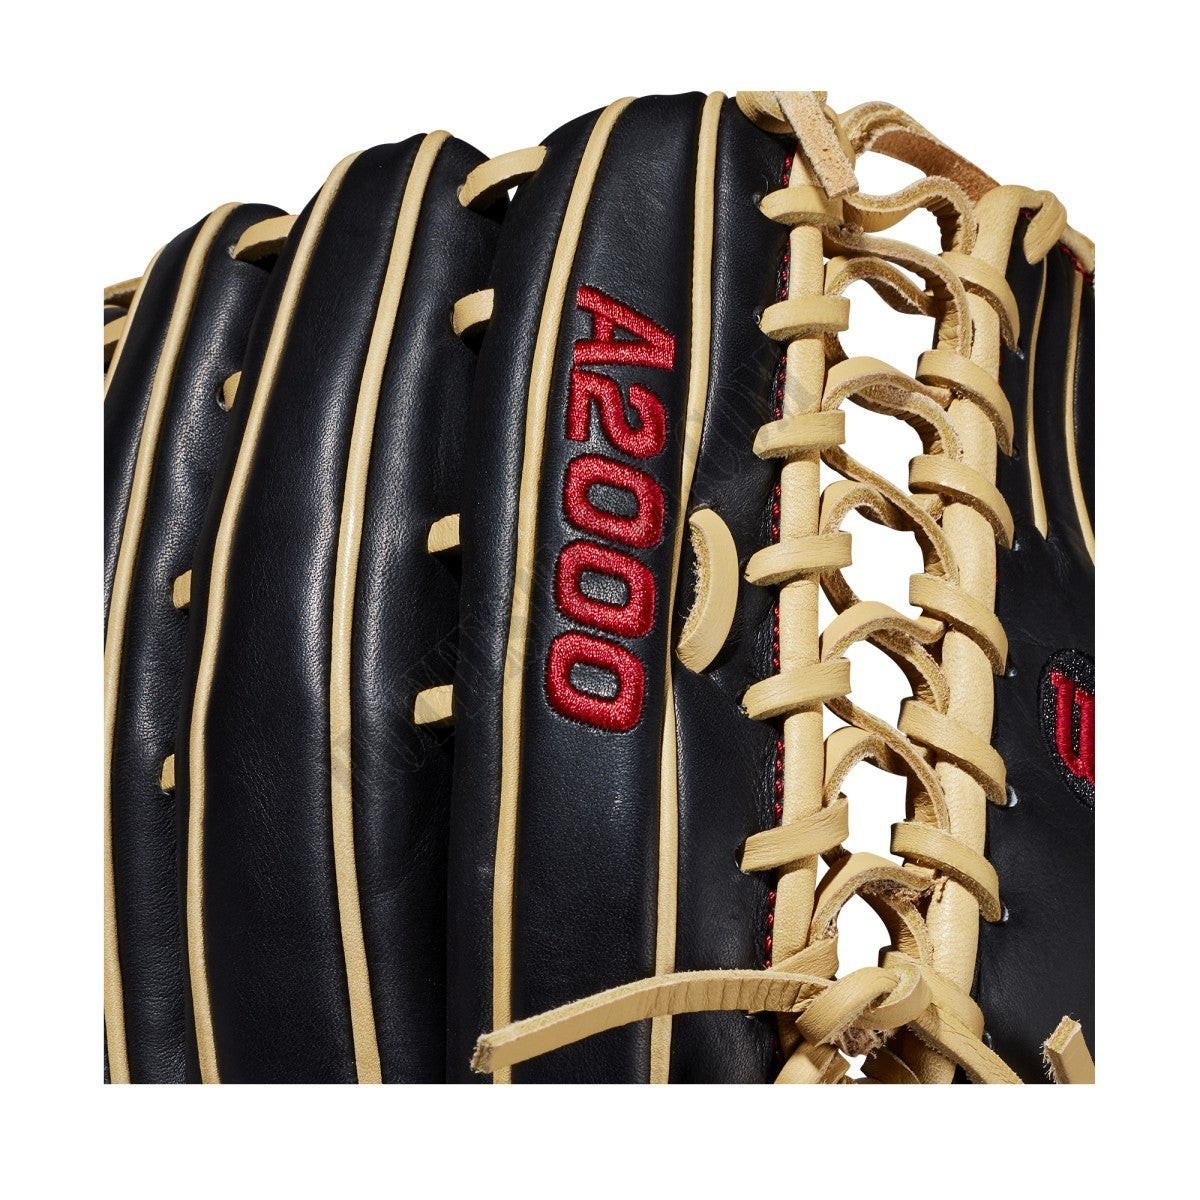 2020 A2000 OT6 12.75" Outfield Baseball Glove ● Wilson Promotions - -6